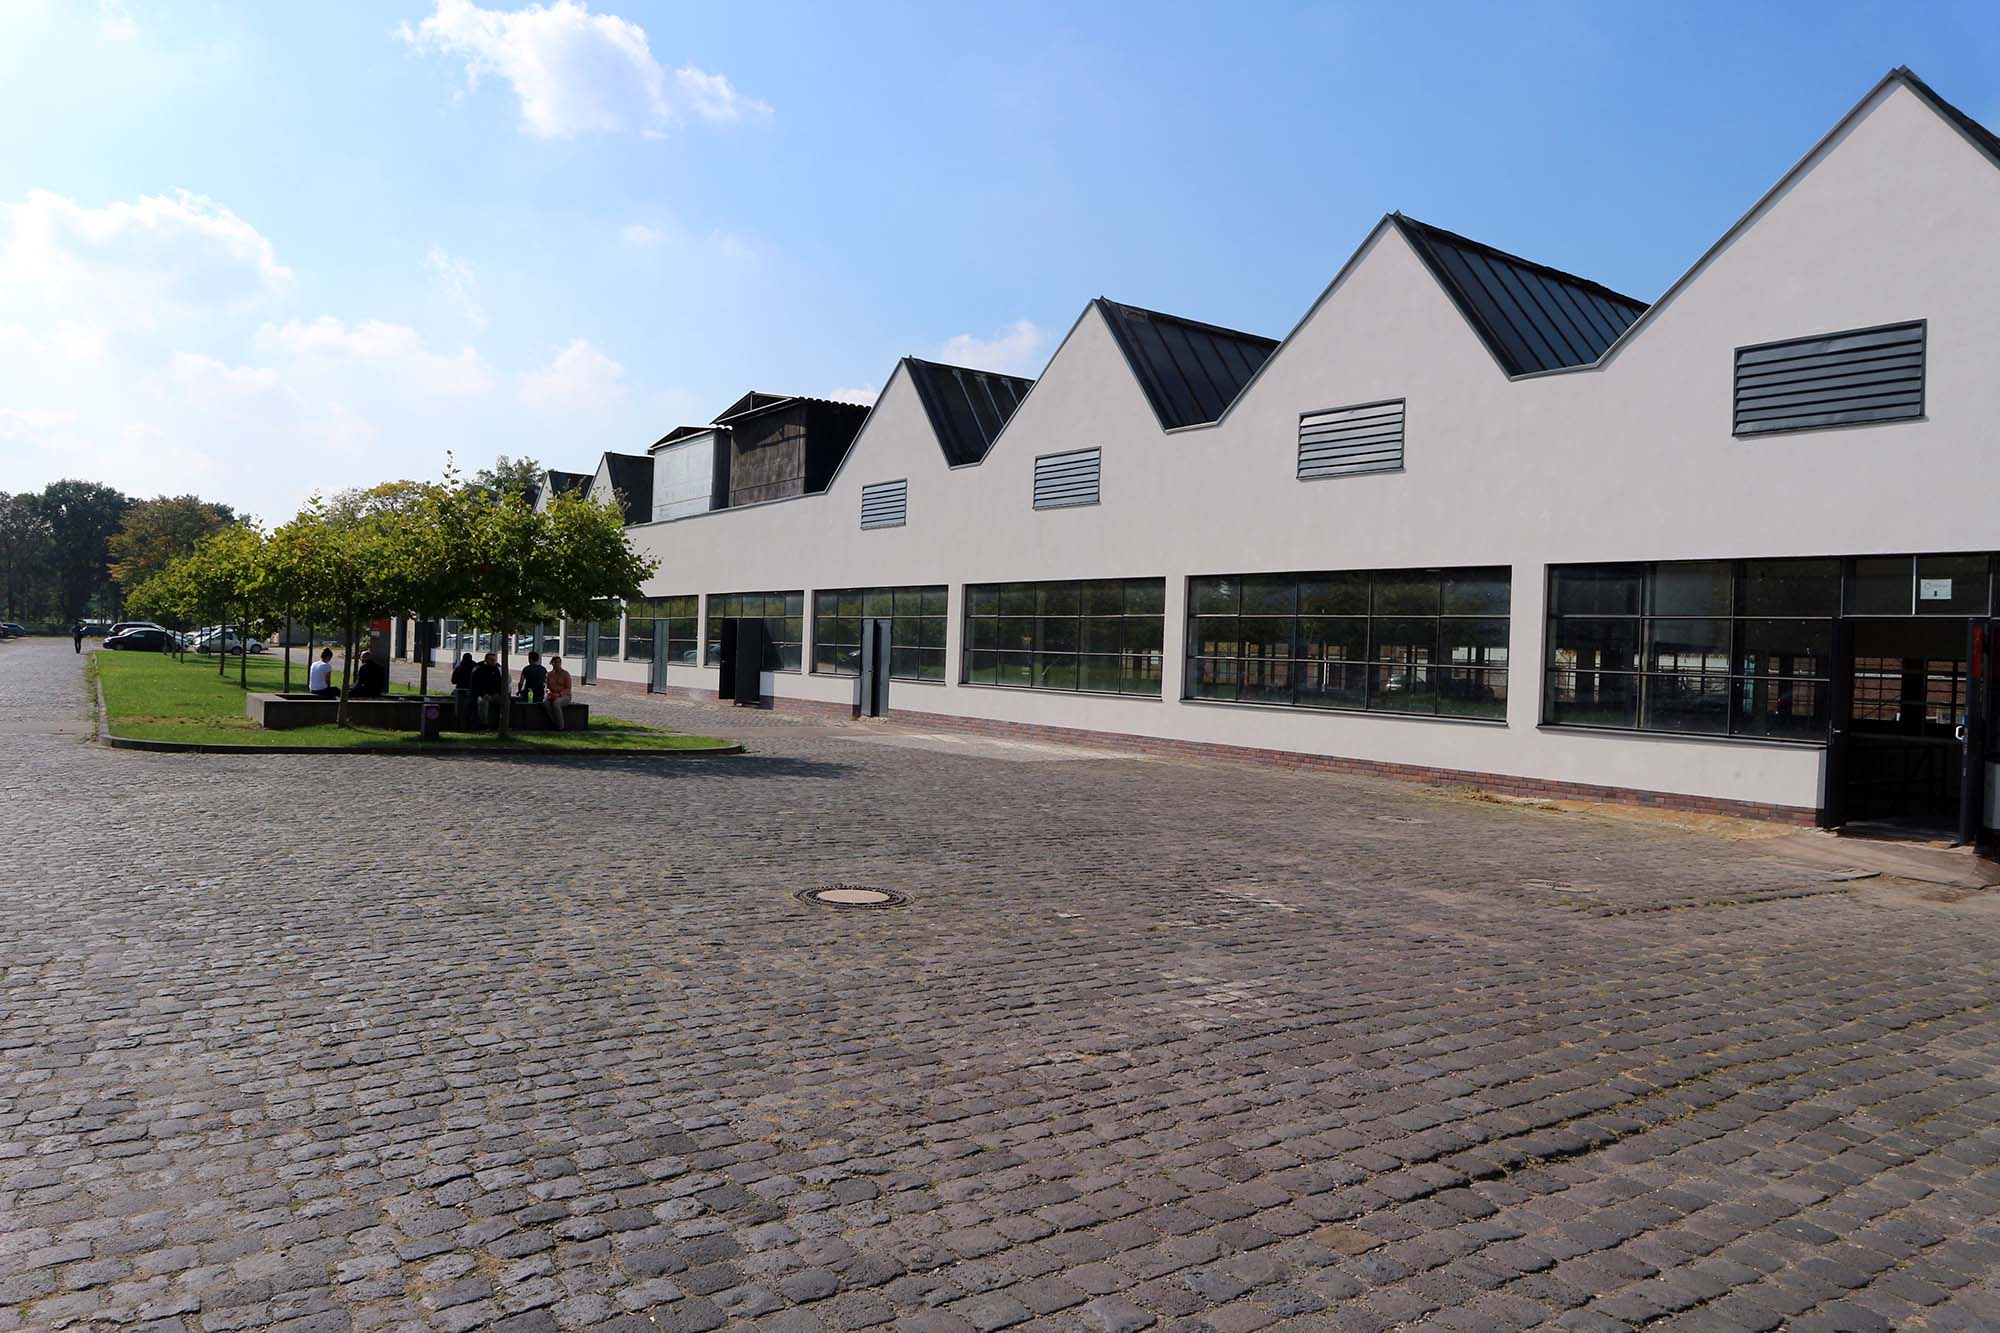 It comprises nine buildings, of which three are in Krefeld 